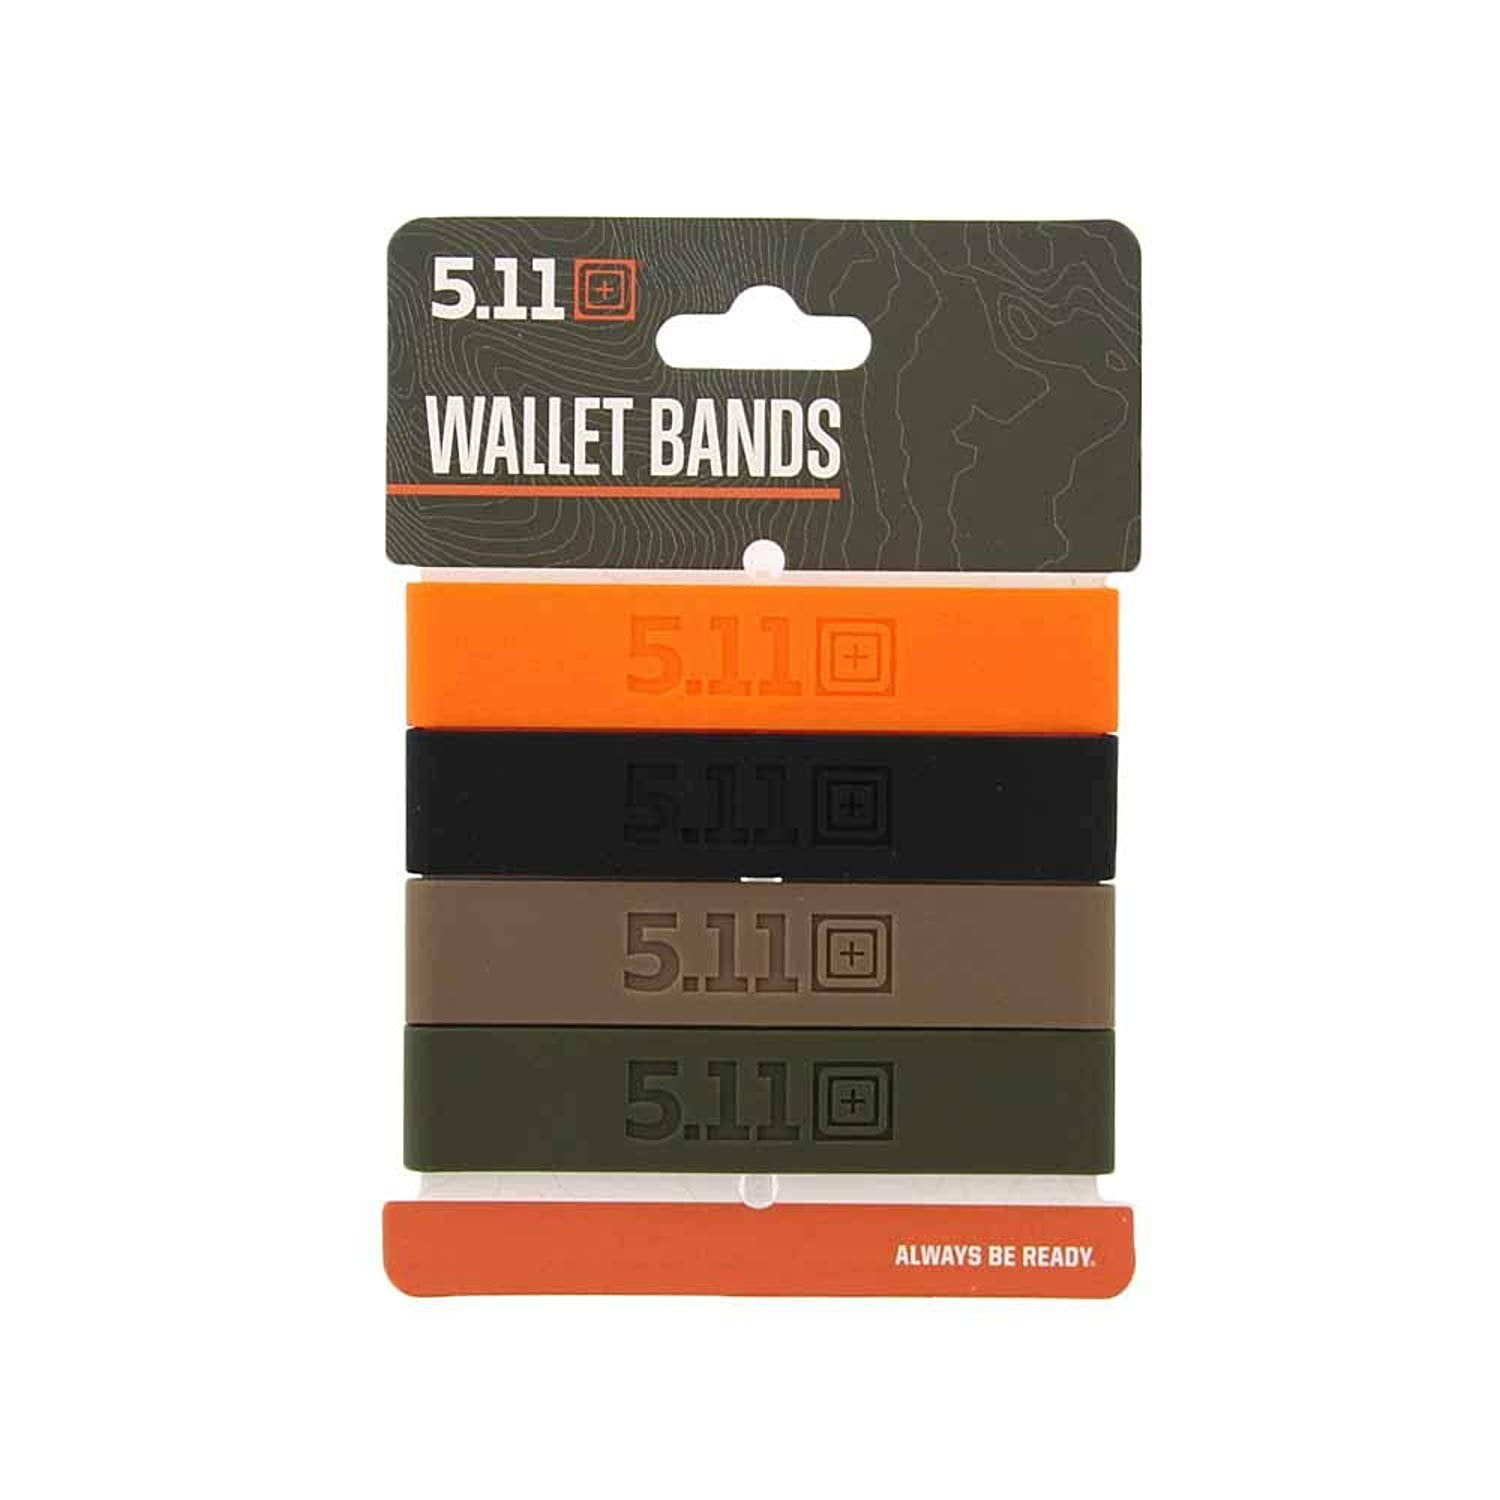 5.11 4 Pack Wallet Bands Style 56422 Minimalist Money Clip